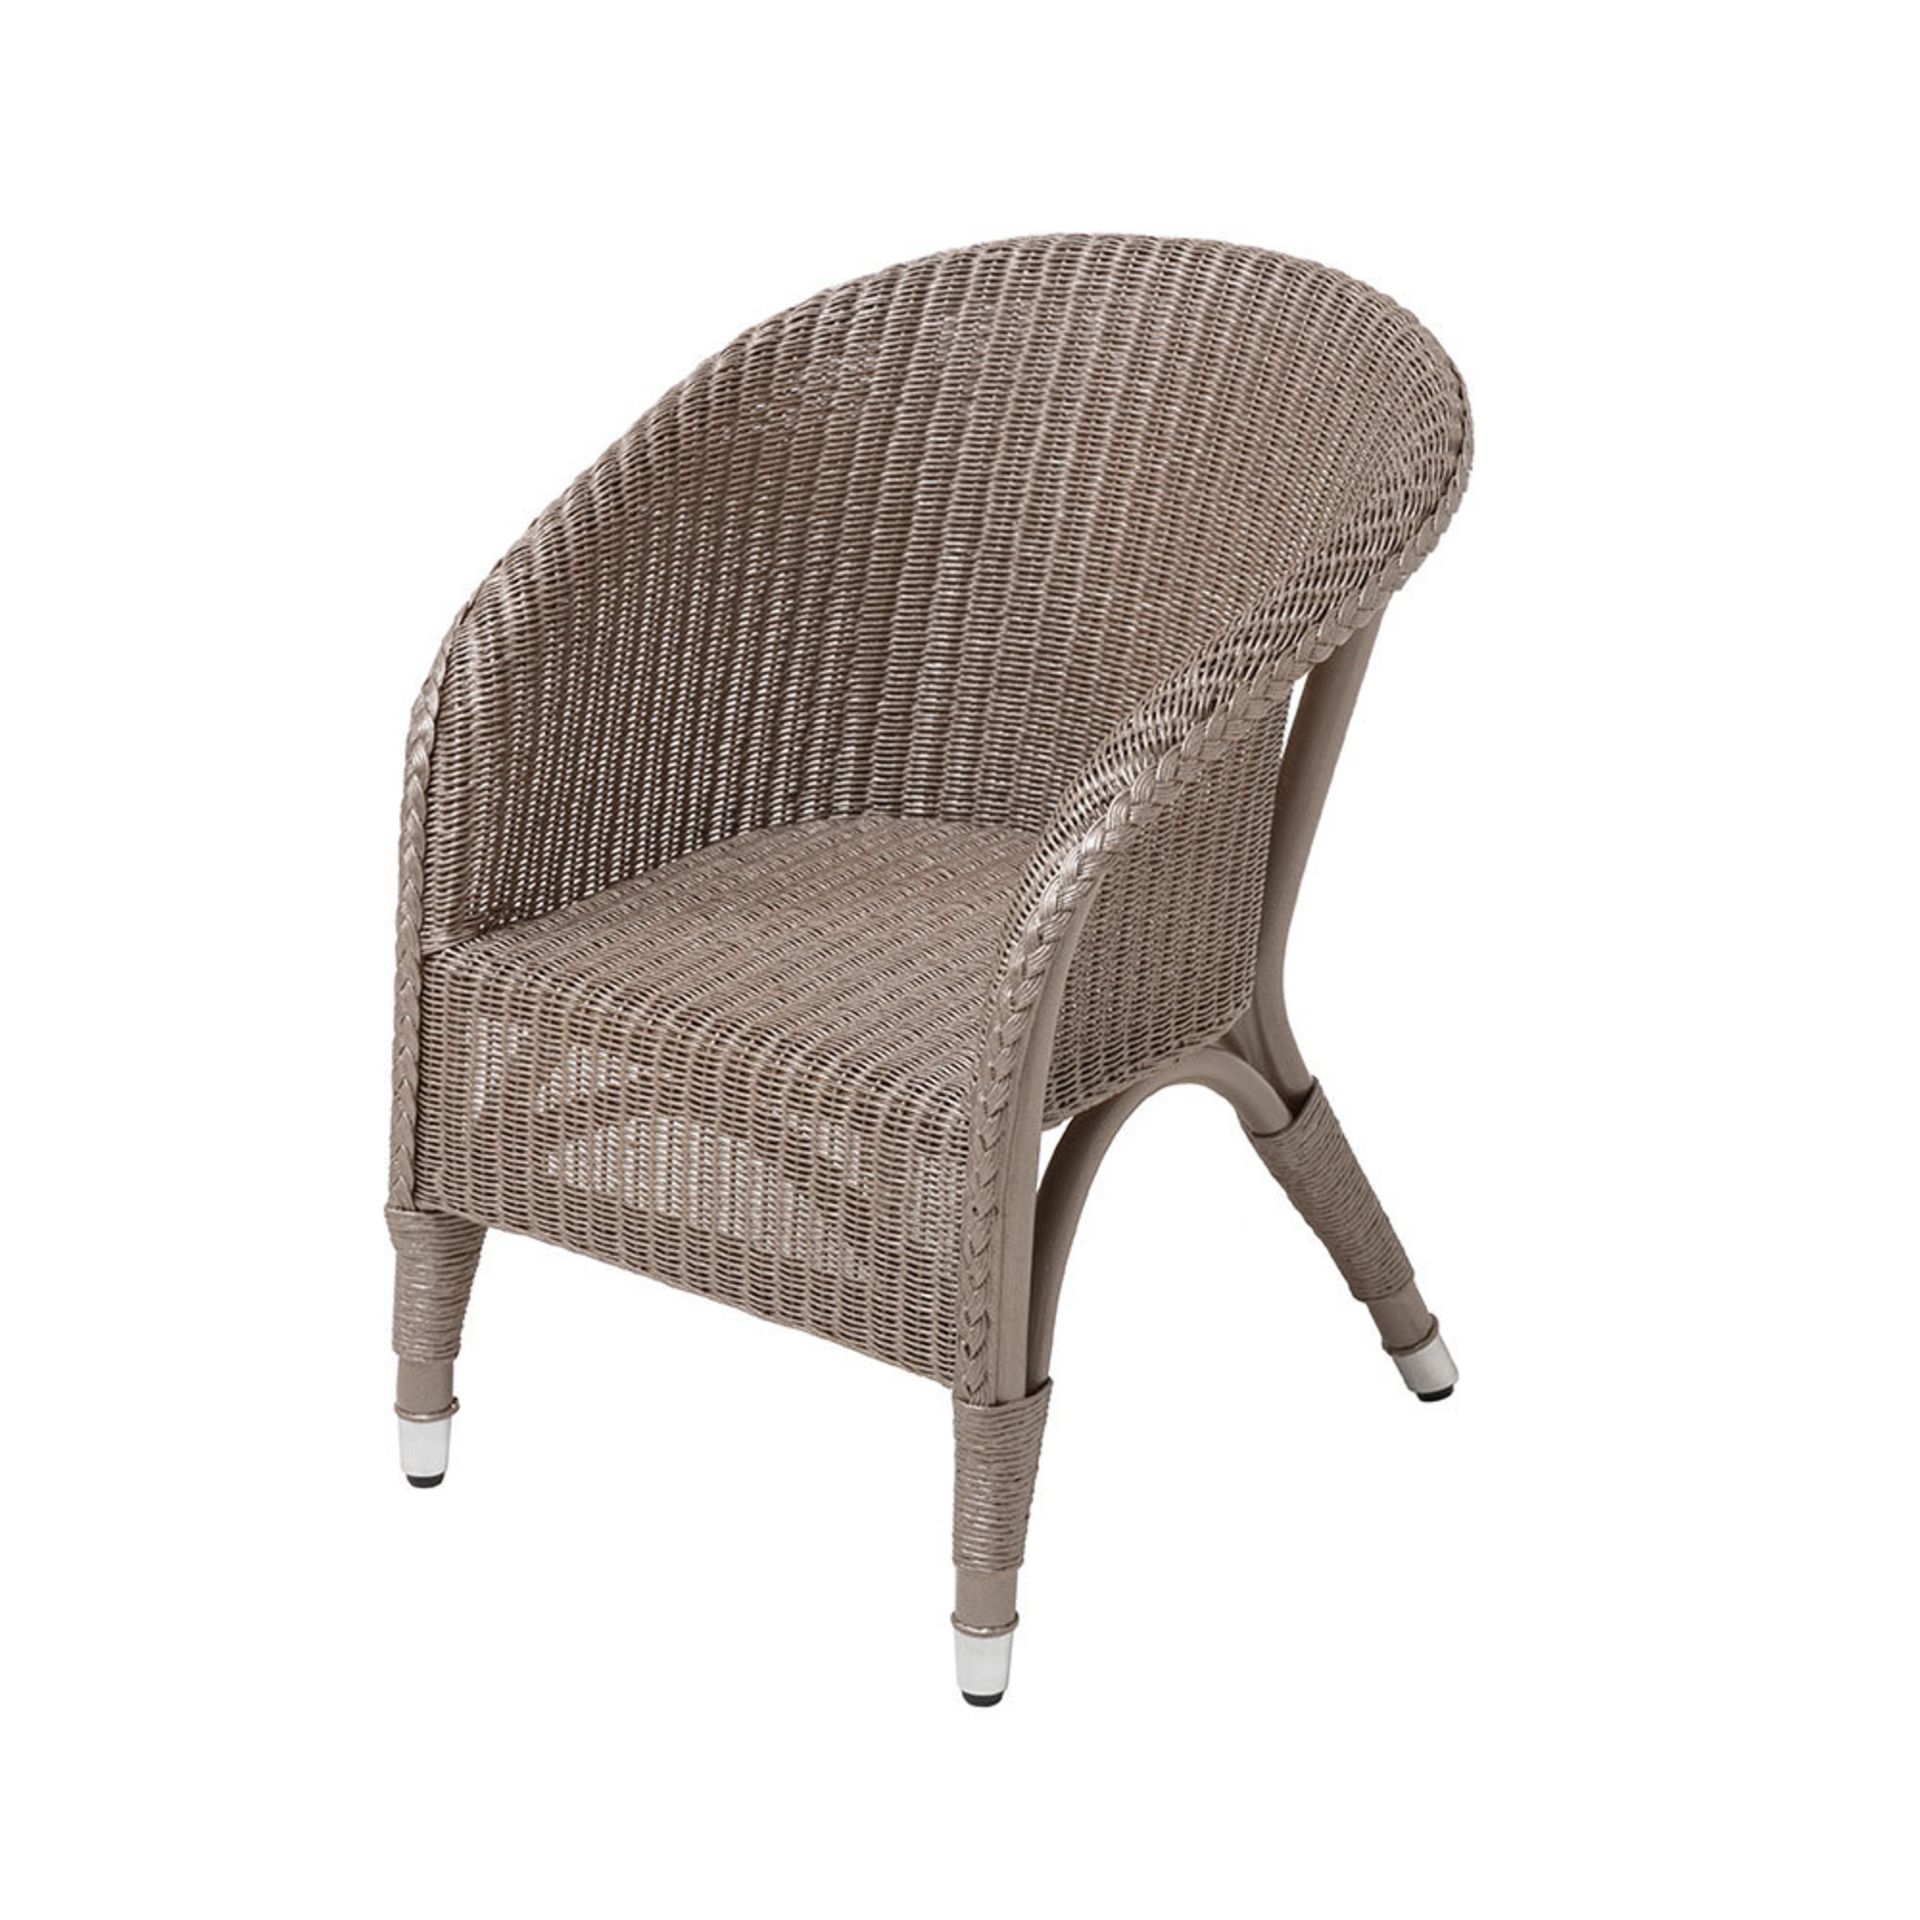 1 x Adorable Childrens Pookie Armchair - Lloyd Loom Weave on a Bent Wood Frame - RRP £275!